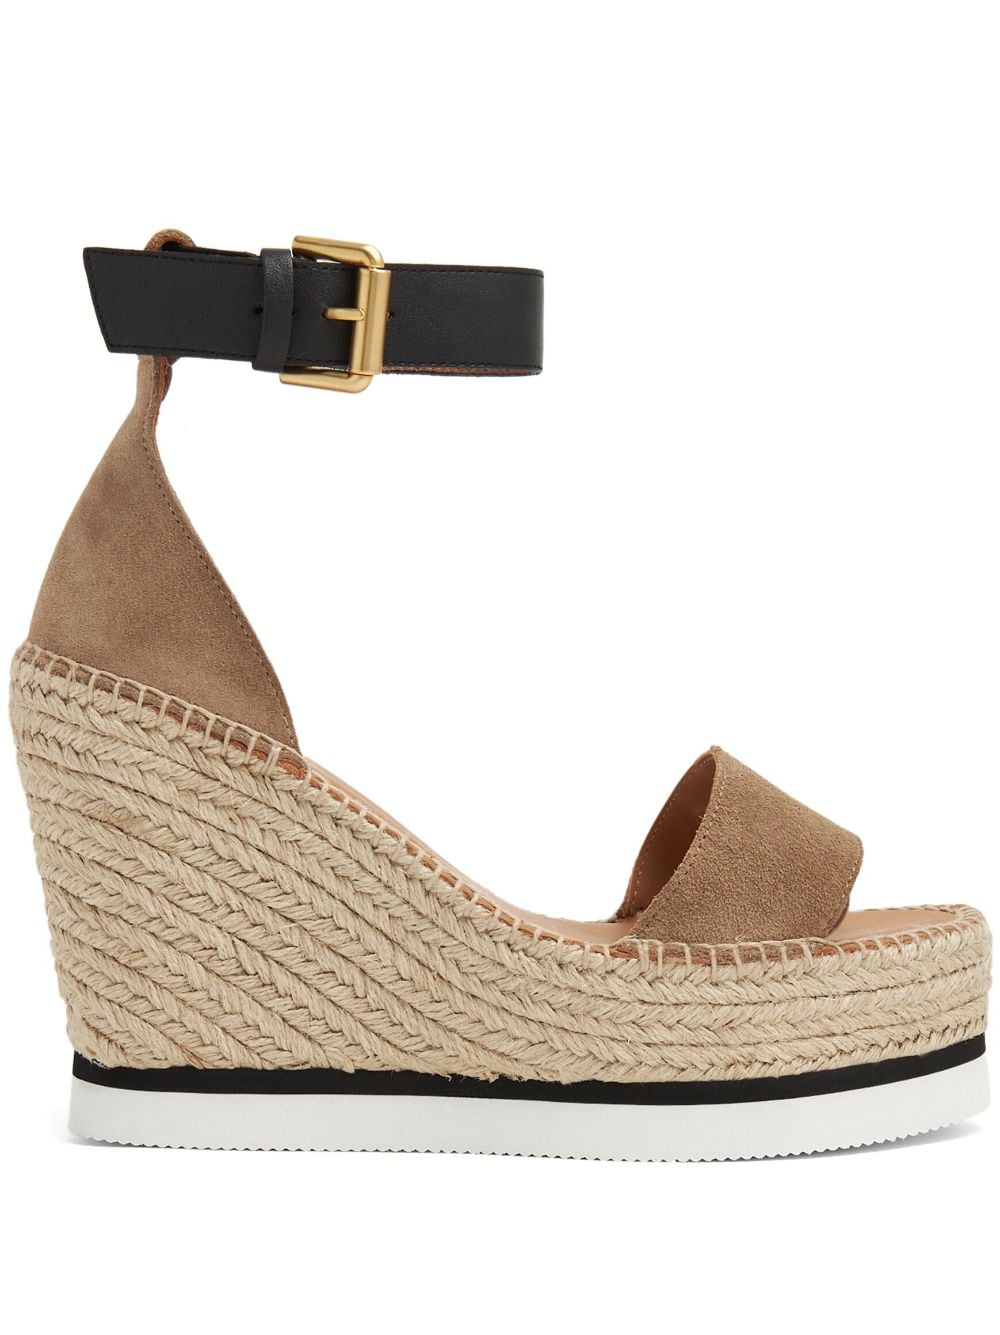 See By Chloé Glyn Bicolor Wedge Espadrille Sandals In Khaki